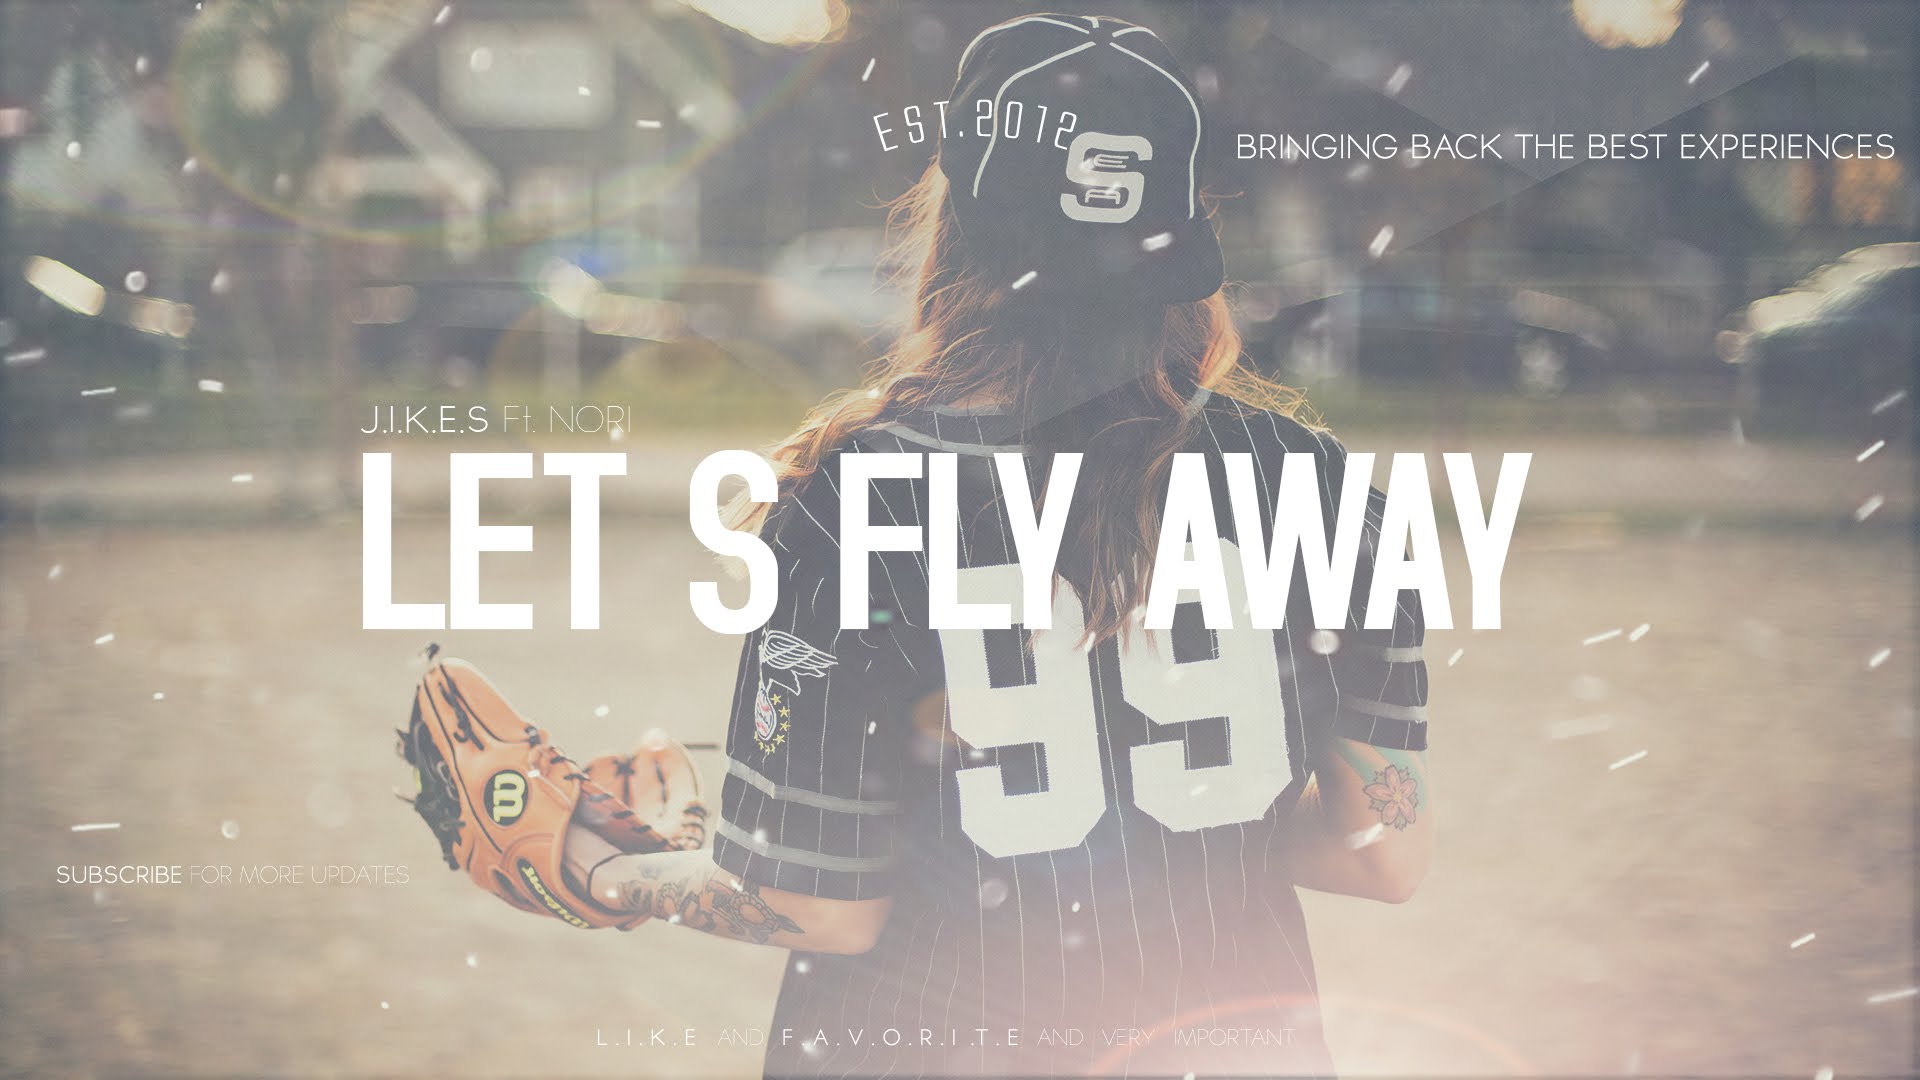 Jikes ft. Nori Let's Fly away pt.2. Tom Enzy feat. Wilhelmina Melodies. Levo - Let's Fly away. Experience is best.